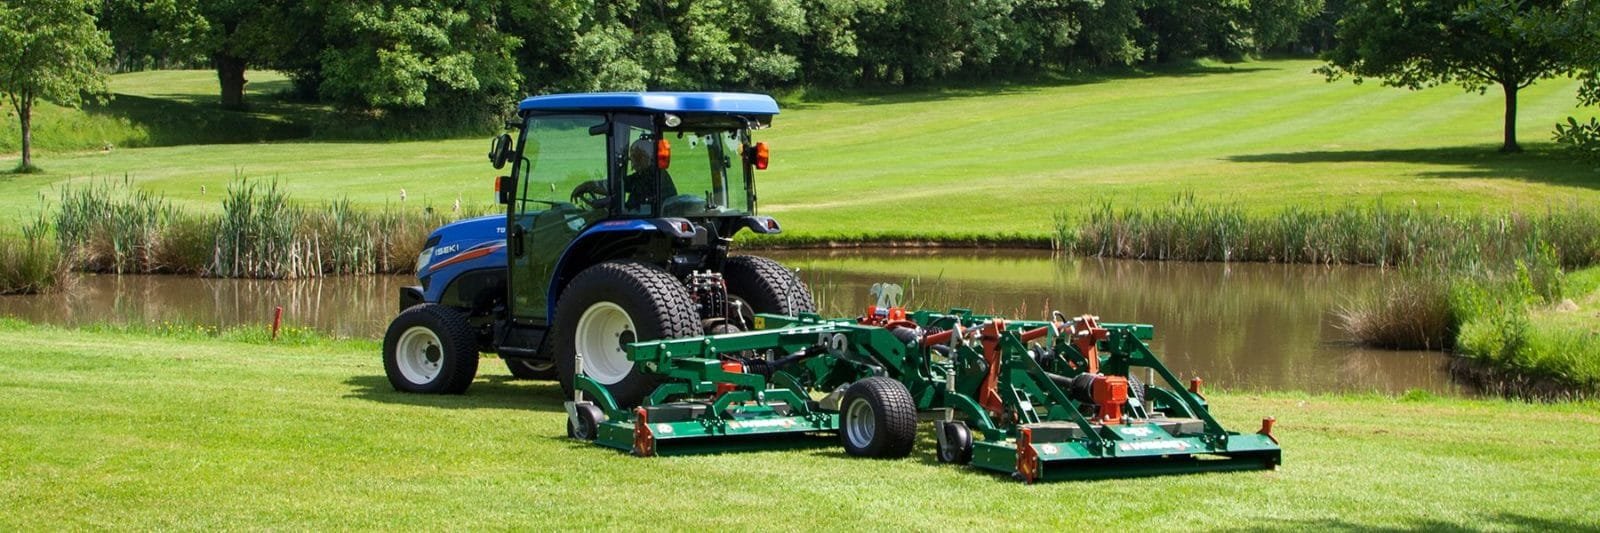 Crx 410main - professional groundcare & agricultural equipment